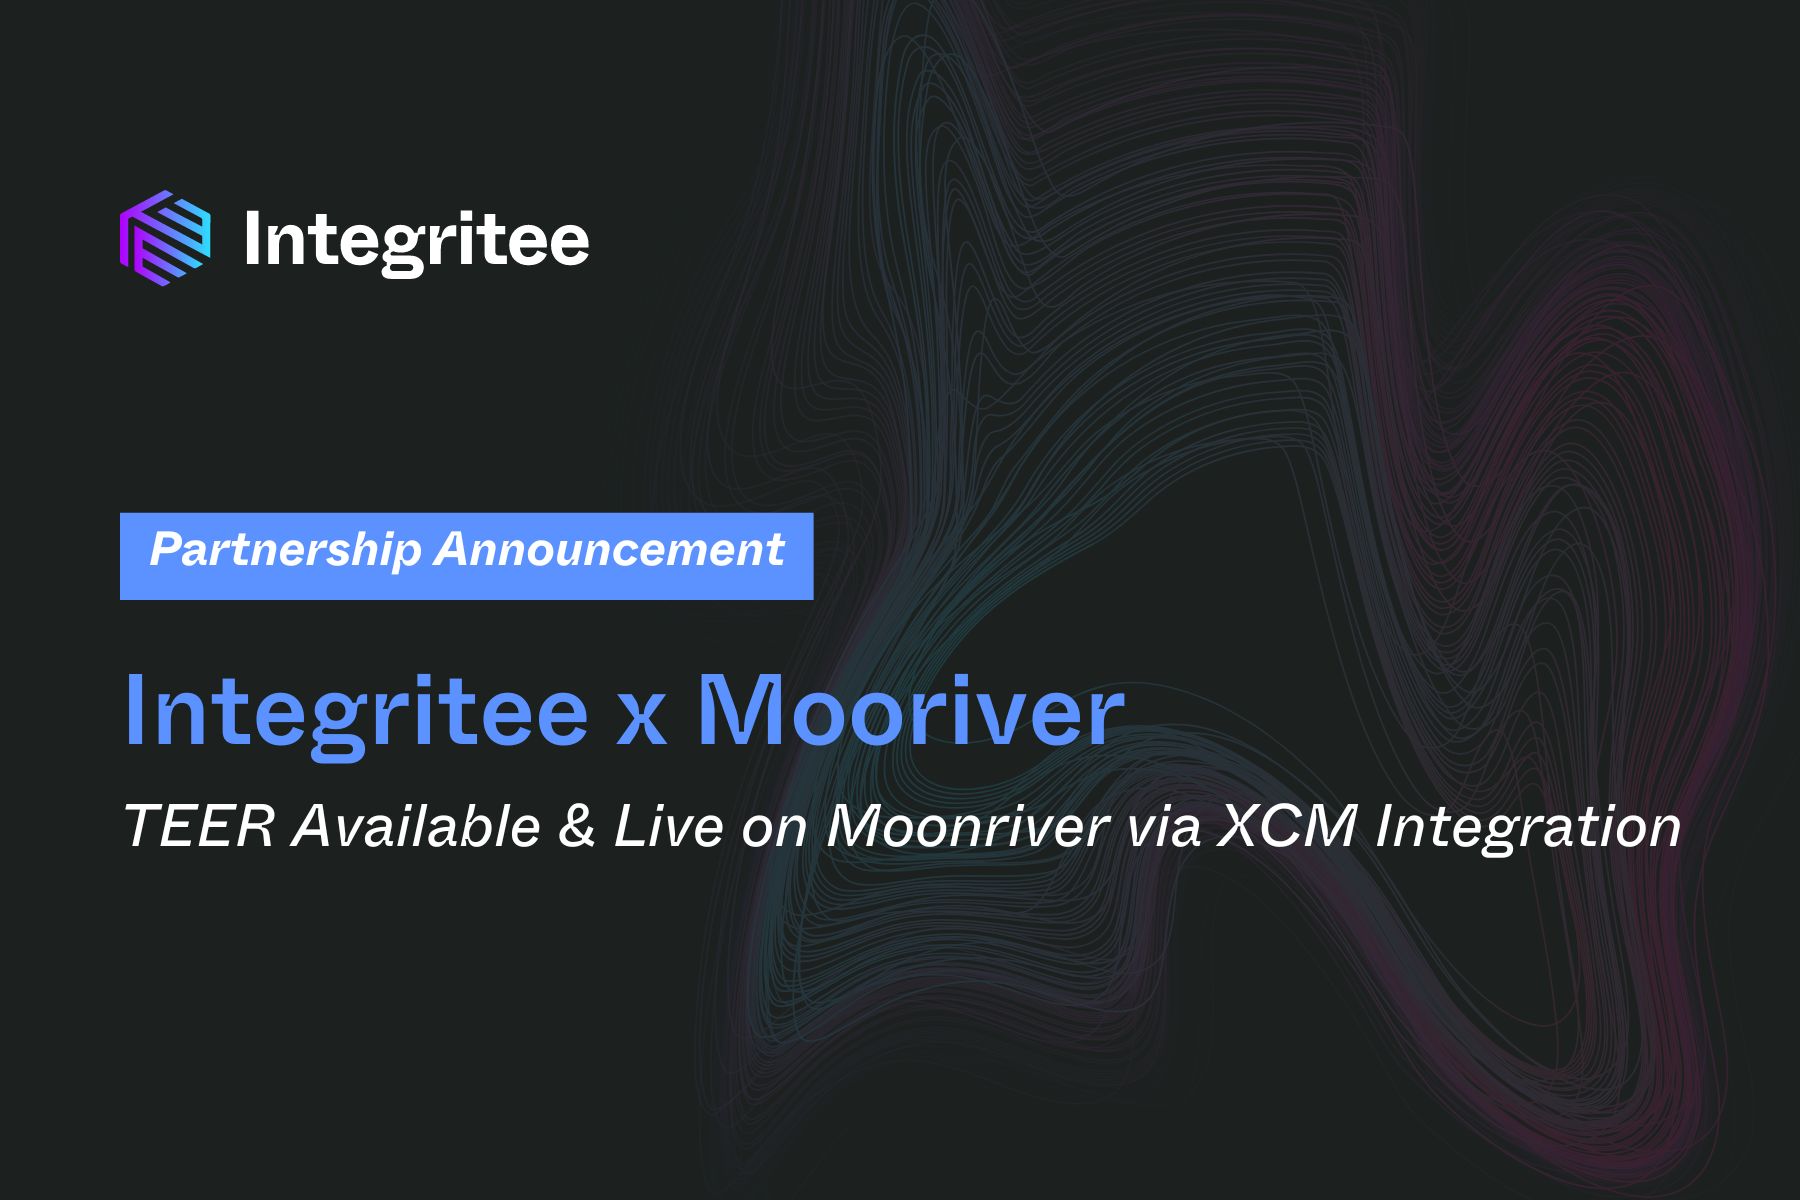 XCM integration of Integritee & Moonriver Completed